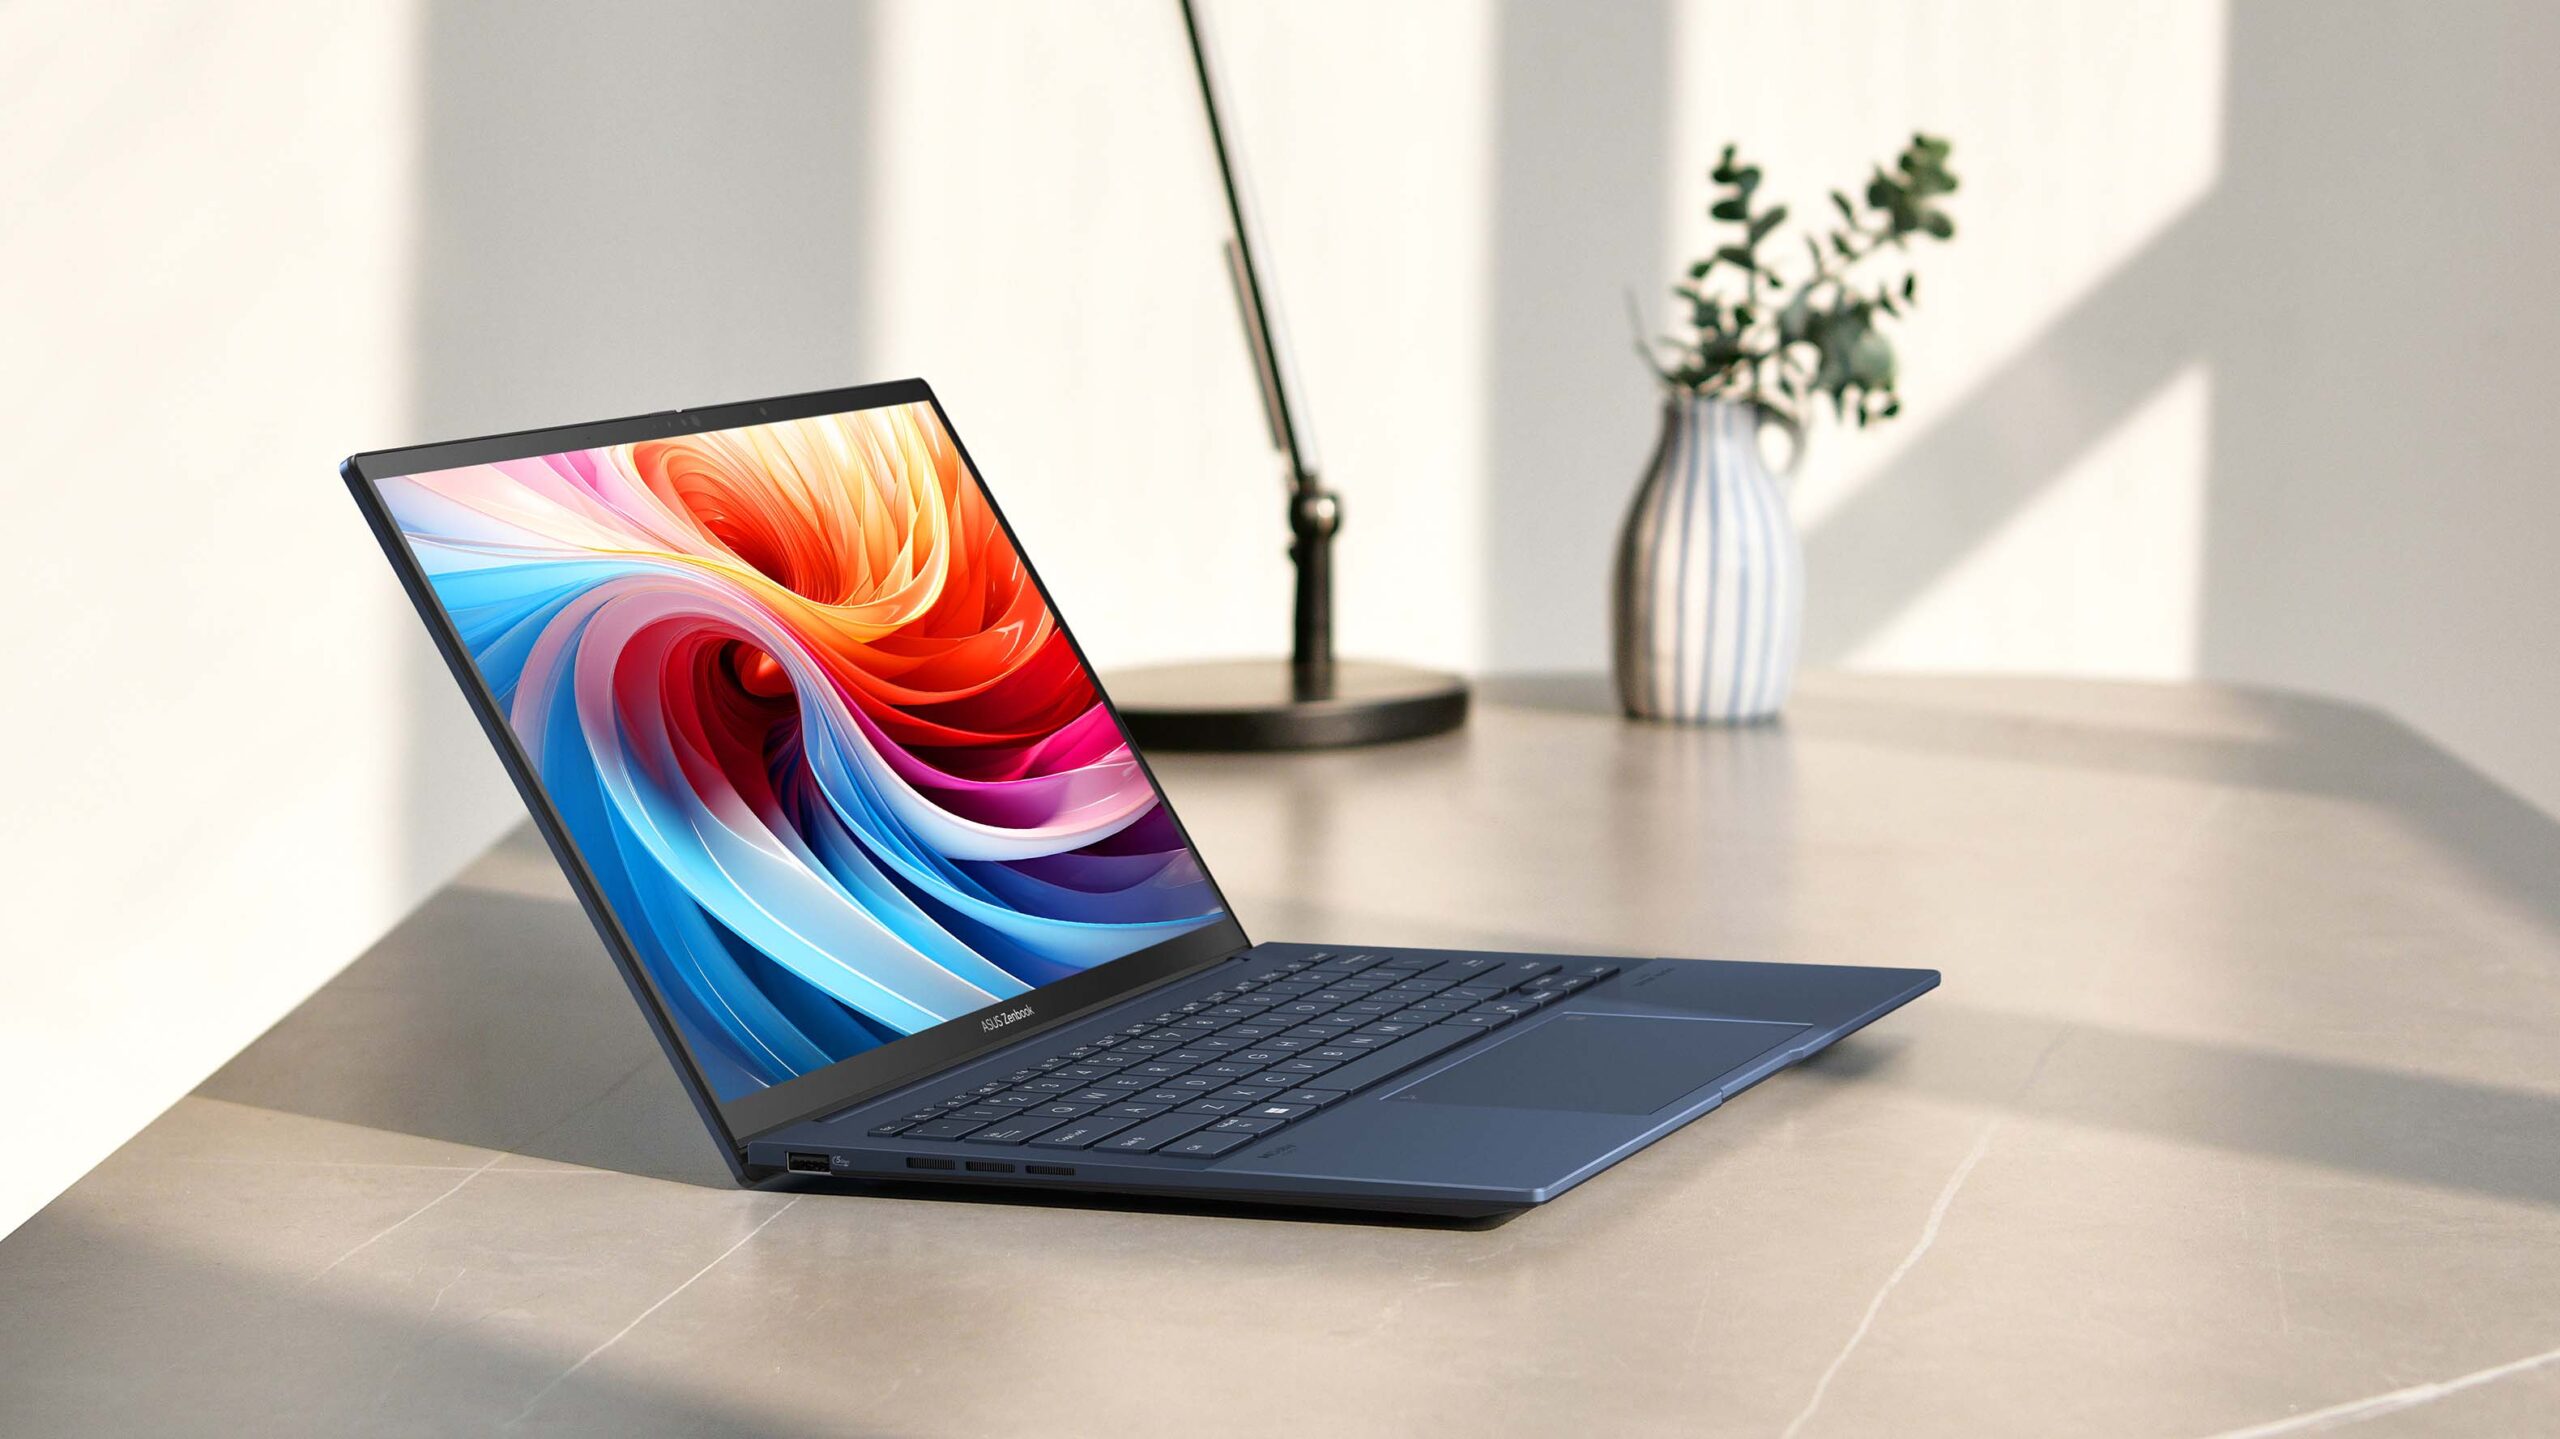 ASUS ZenBook 14 OLED (2022): A Solid Thin & Light Windows Laptop? 